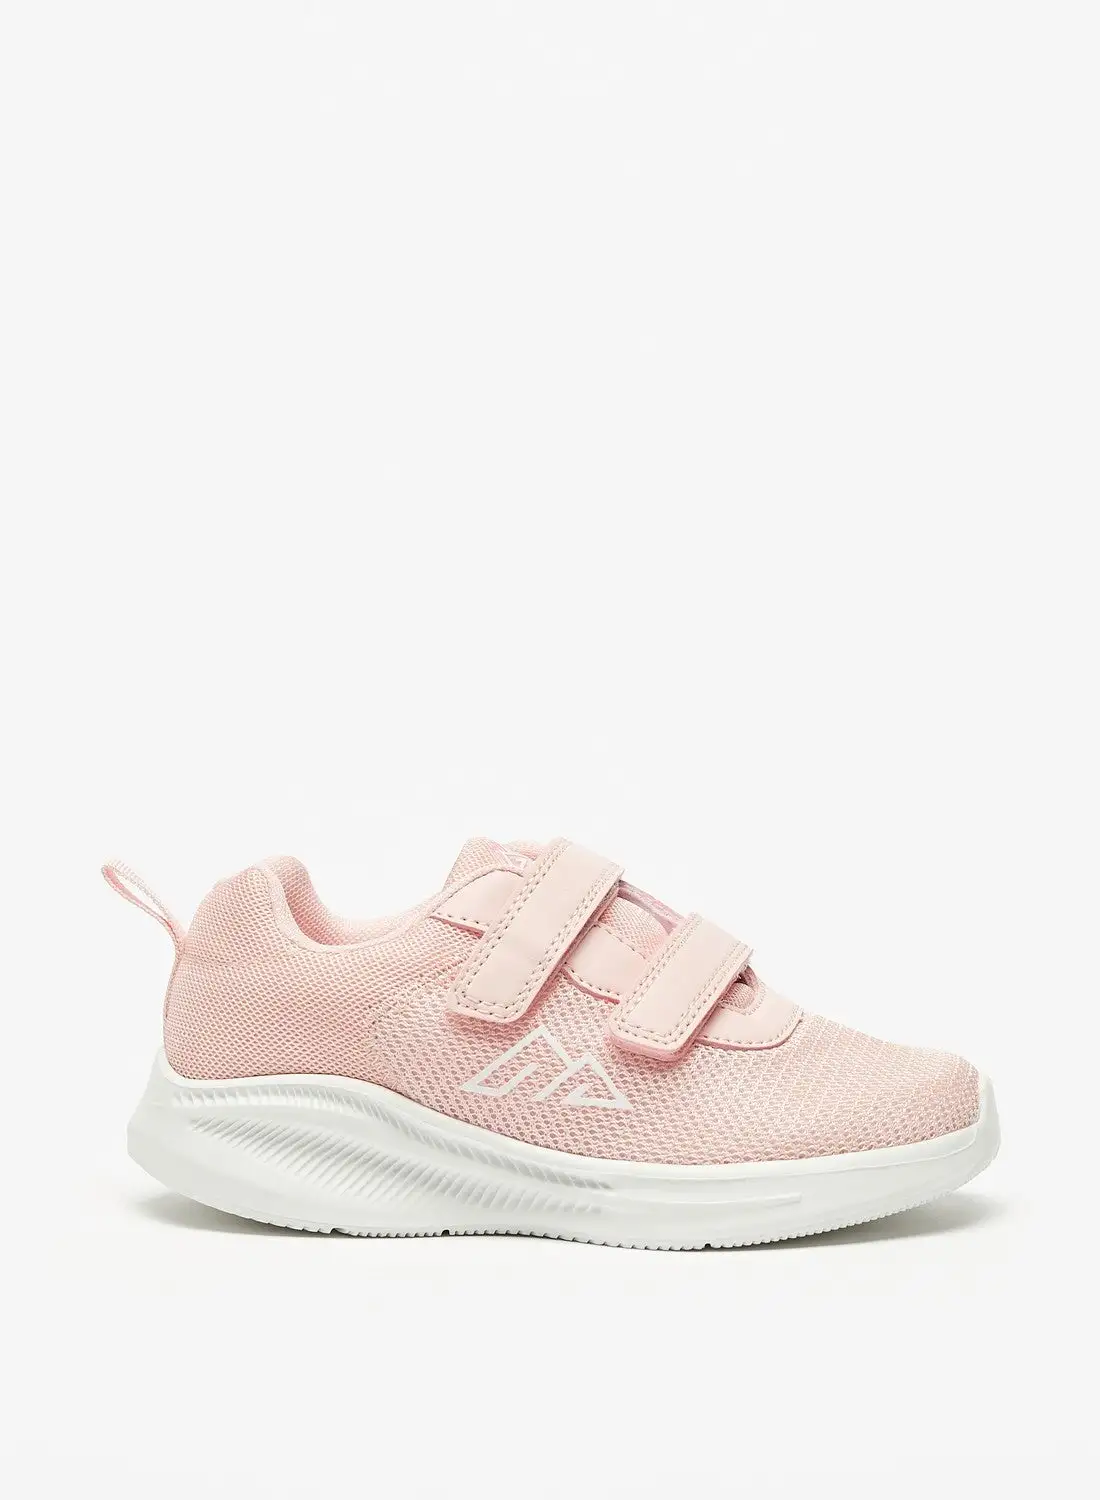 Oaklan by Shoexpress Girls Textured Sports Shoes with Hook and Loop Closure